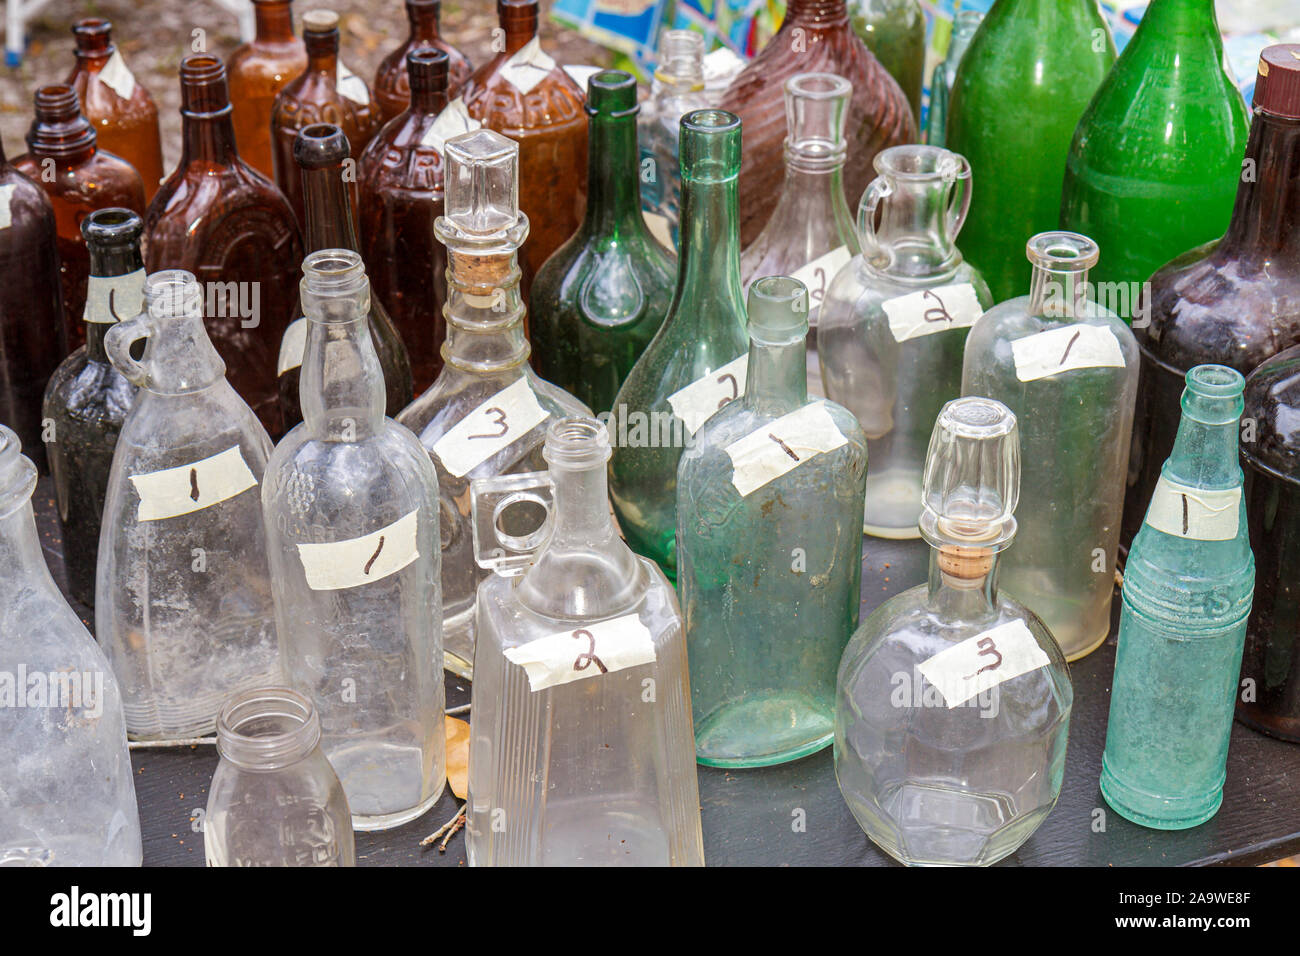 Estero Fort Ft. Myers Florida,Koreshan State historic Park,Antique Engine Show,bottles,collectibles,FL100322082 Stock Photo